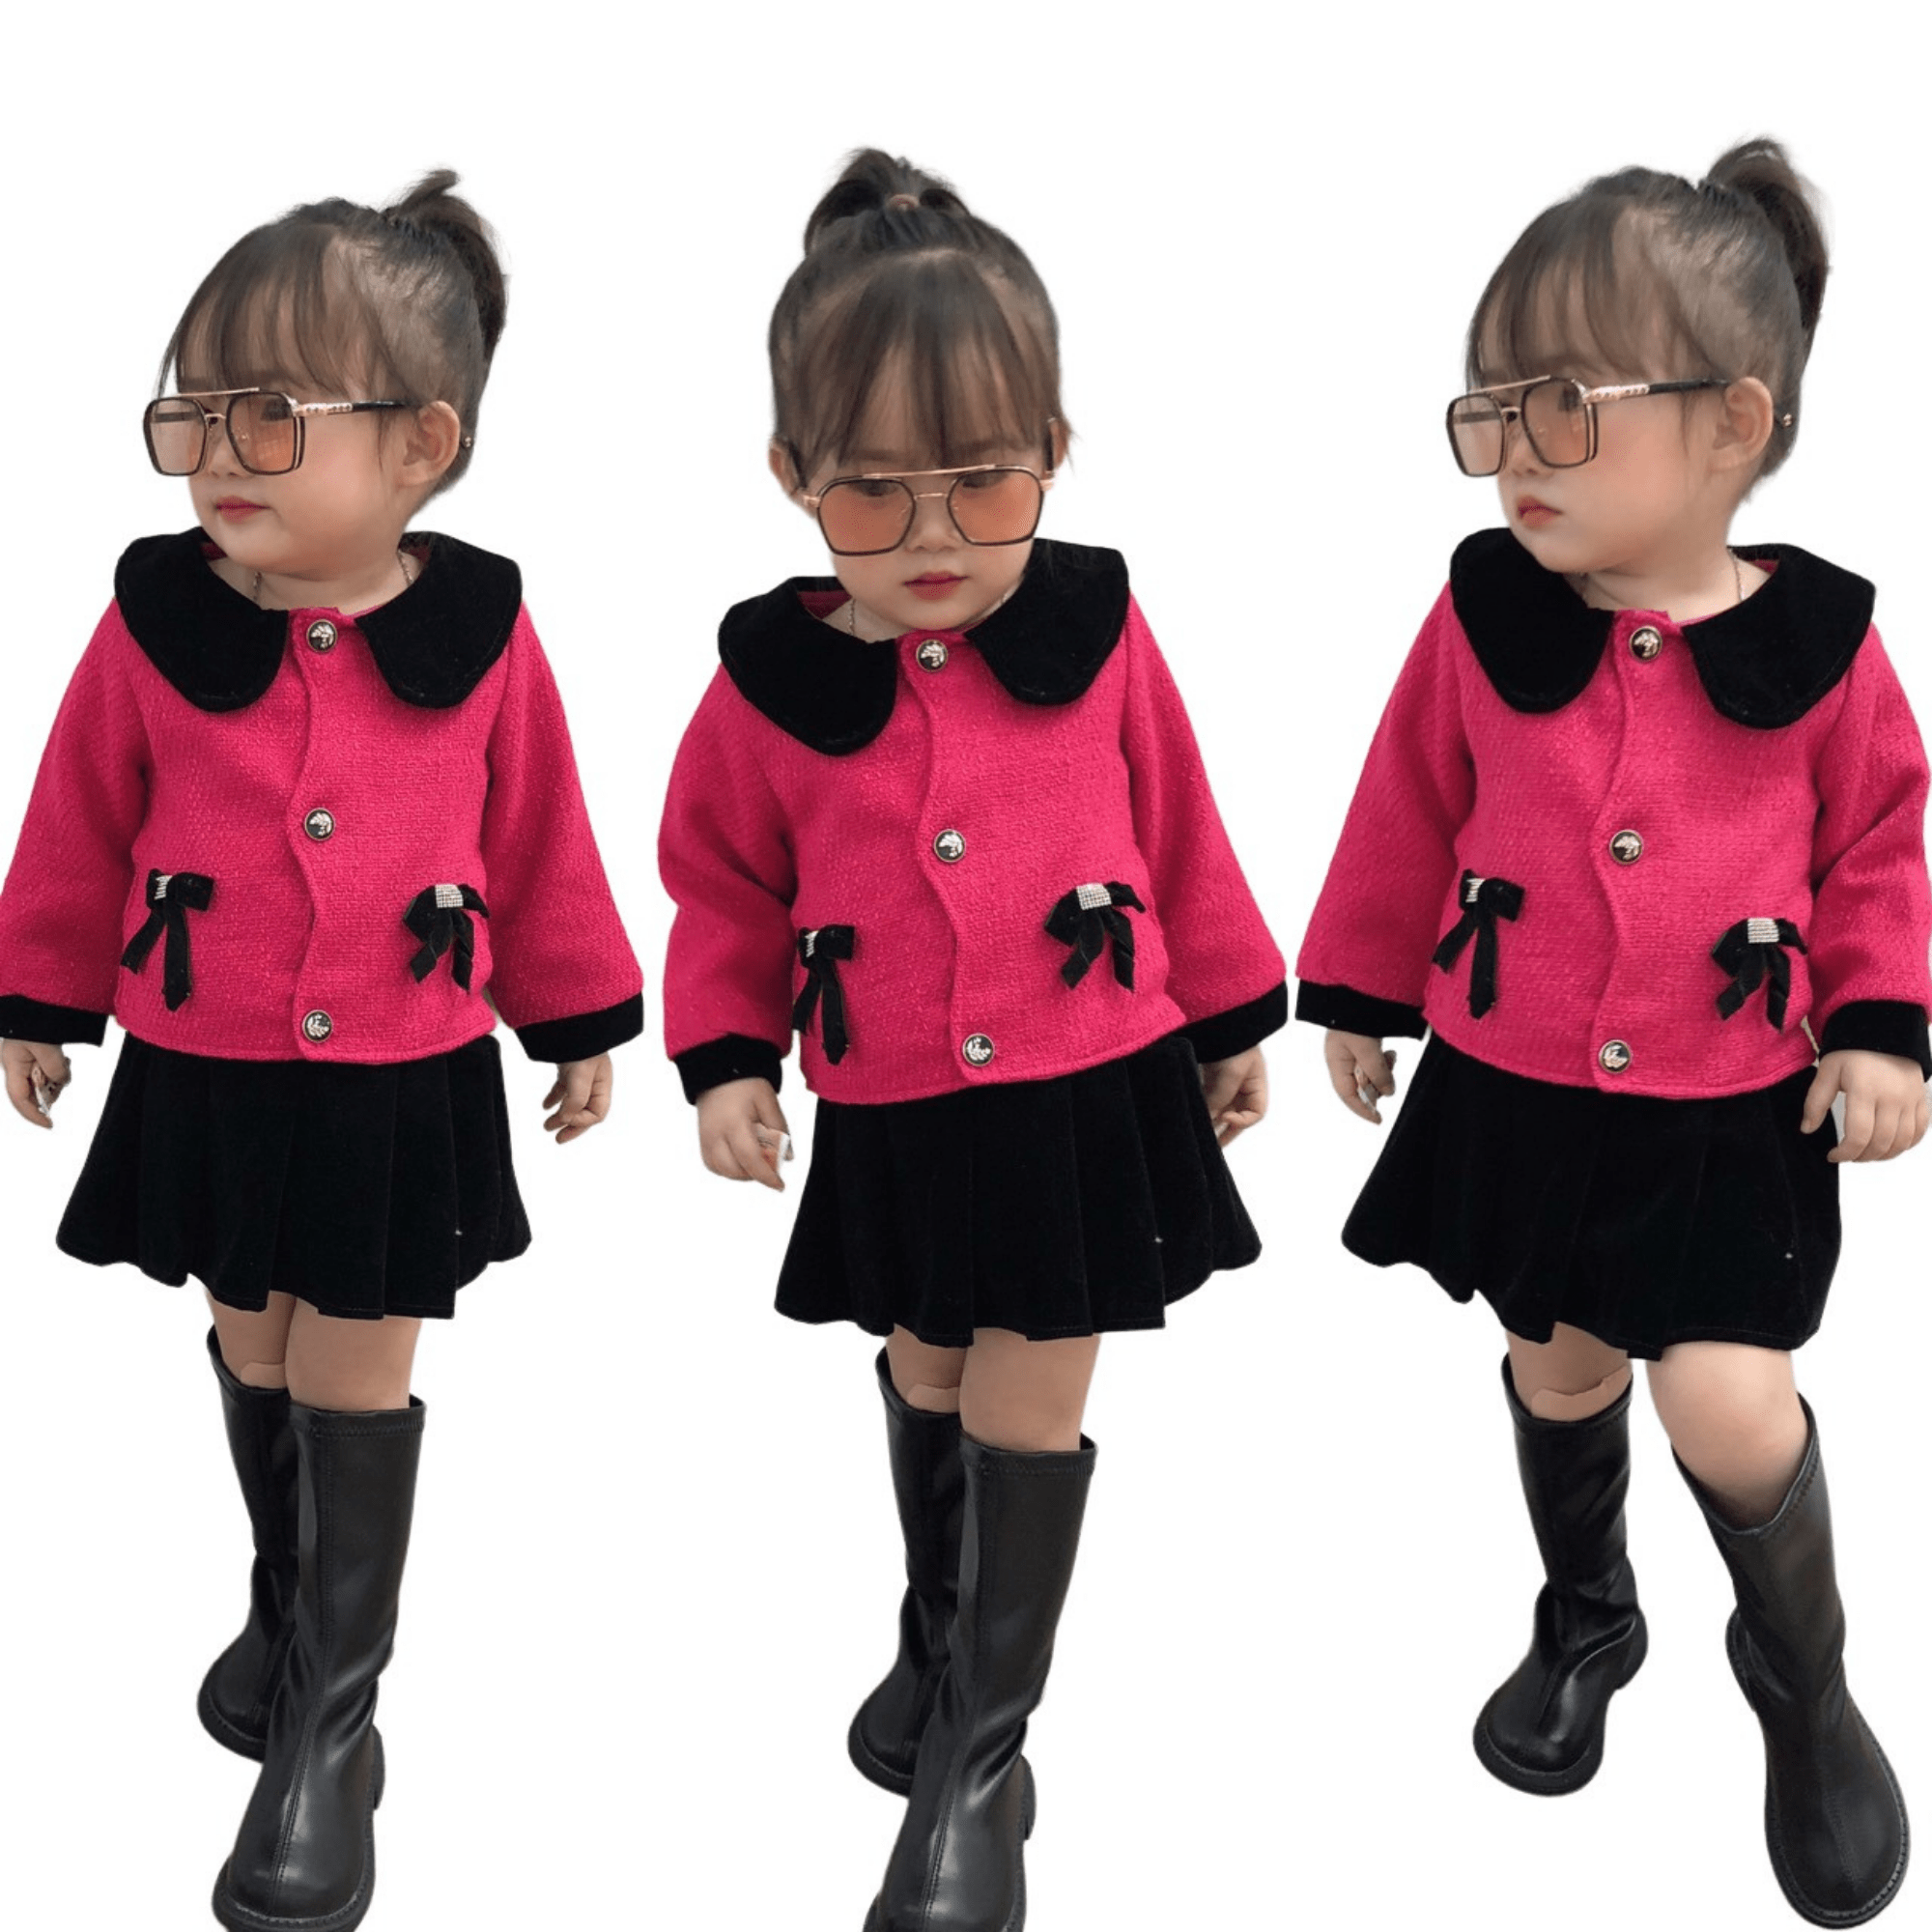 Winter Clothes For Kids High Quality 100% Wool Dresses New Fashion Each One In Opp Bag From Vietnam Manufacturer